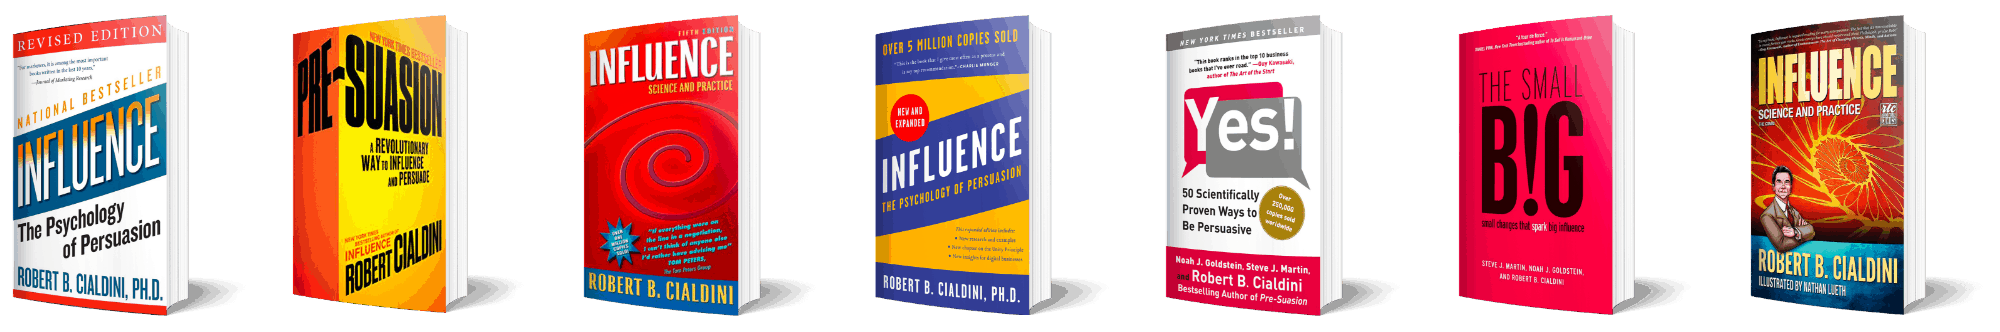 Dr. Robert Cialdini’s Bestselling Books Large